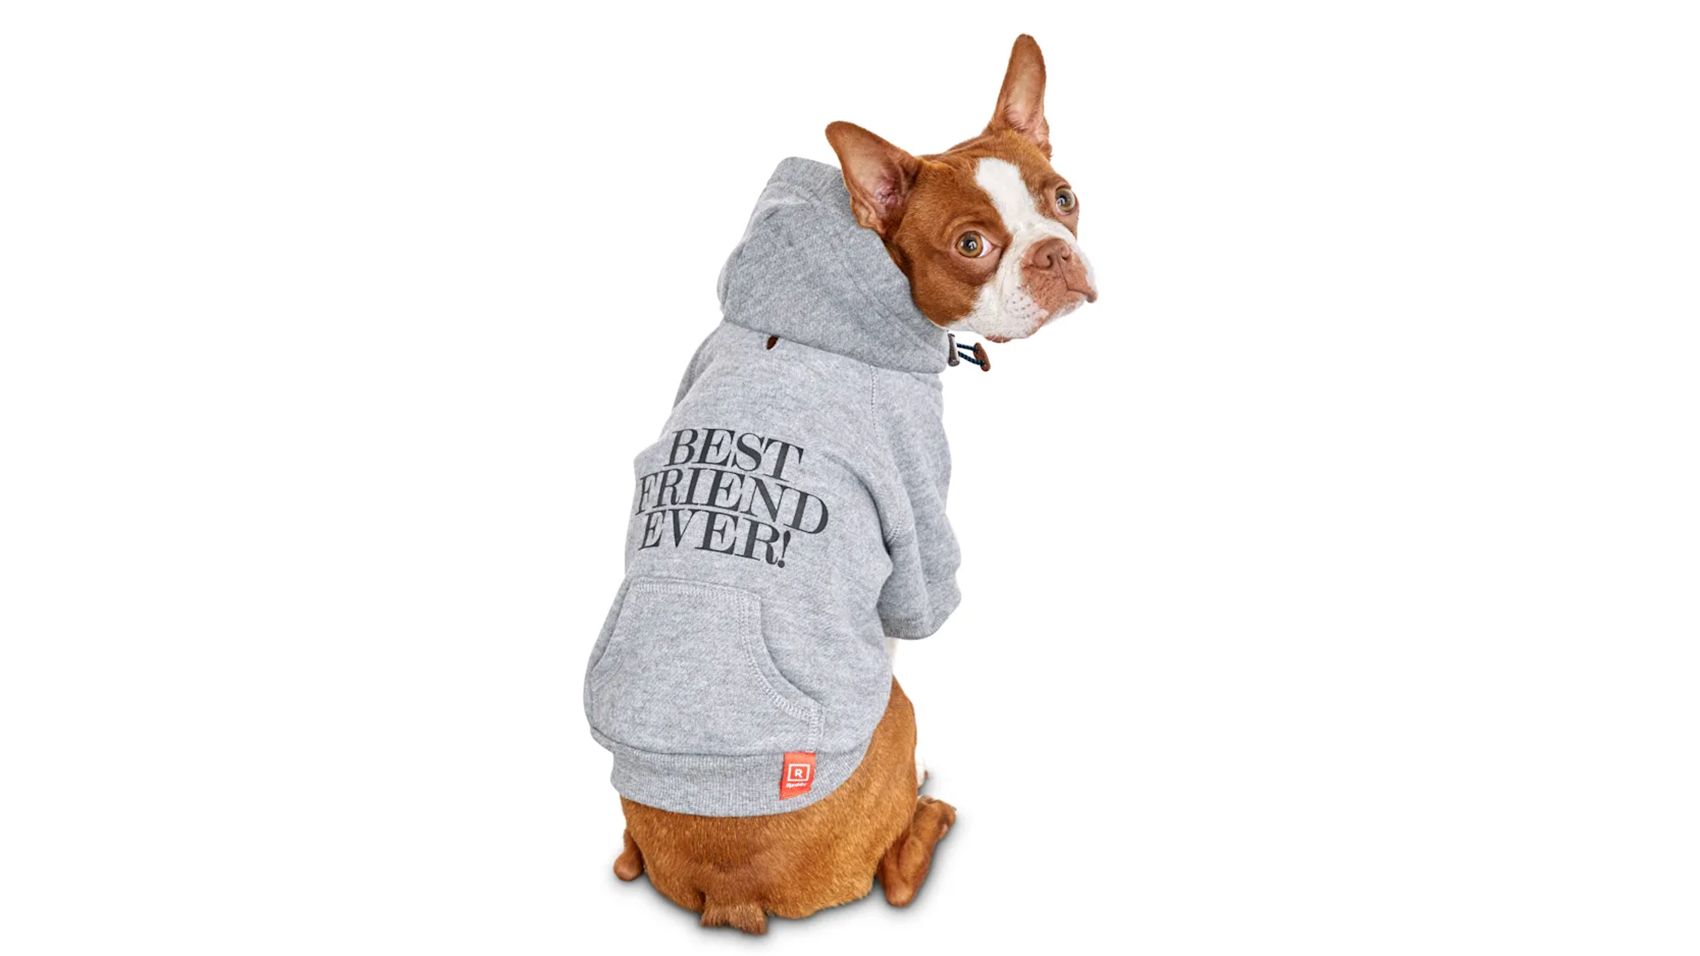 XS, Gray Pet Clothing Clothes Dog Coat Hoodies Winter Autumn Sweatshirt for Small Middle Large Size Dogs 11 Colors 100% Cotton 2018 New